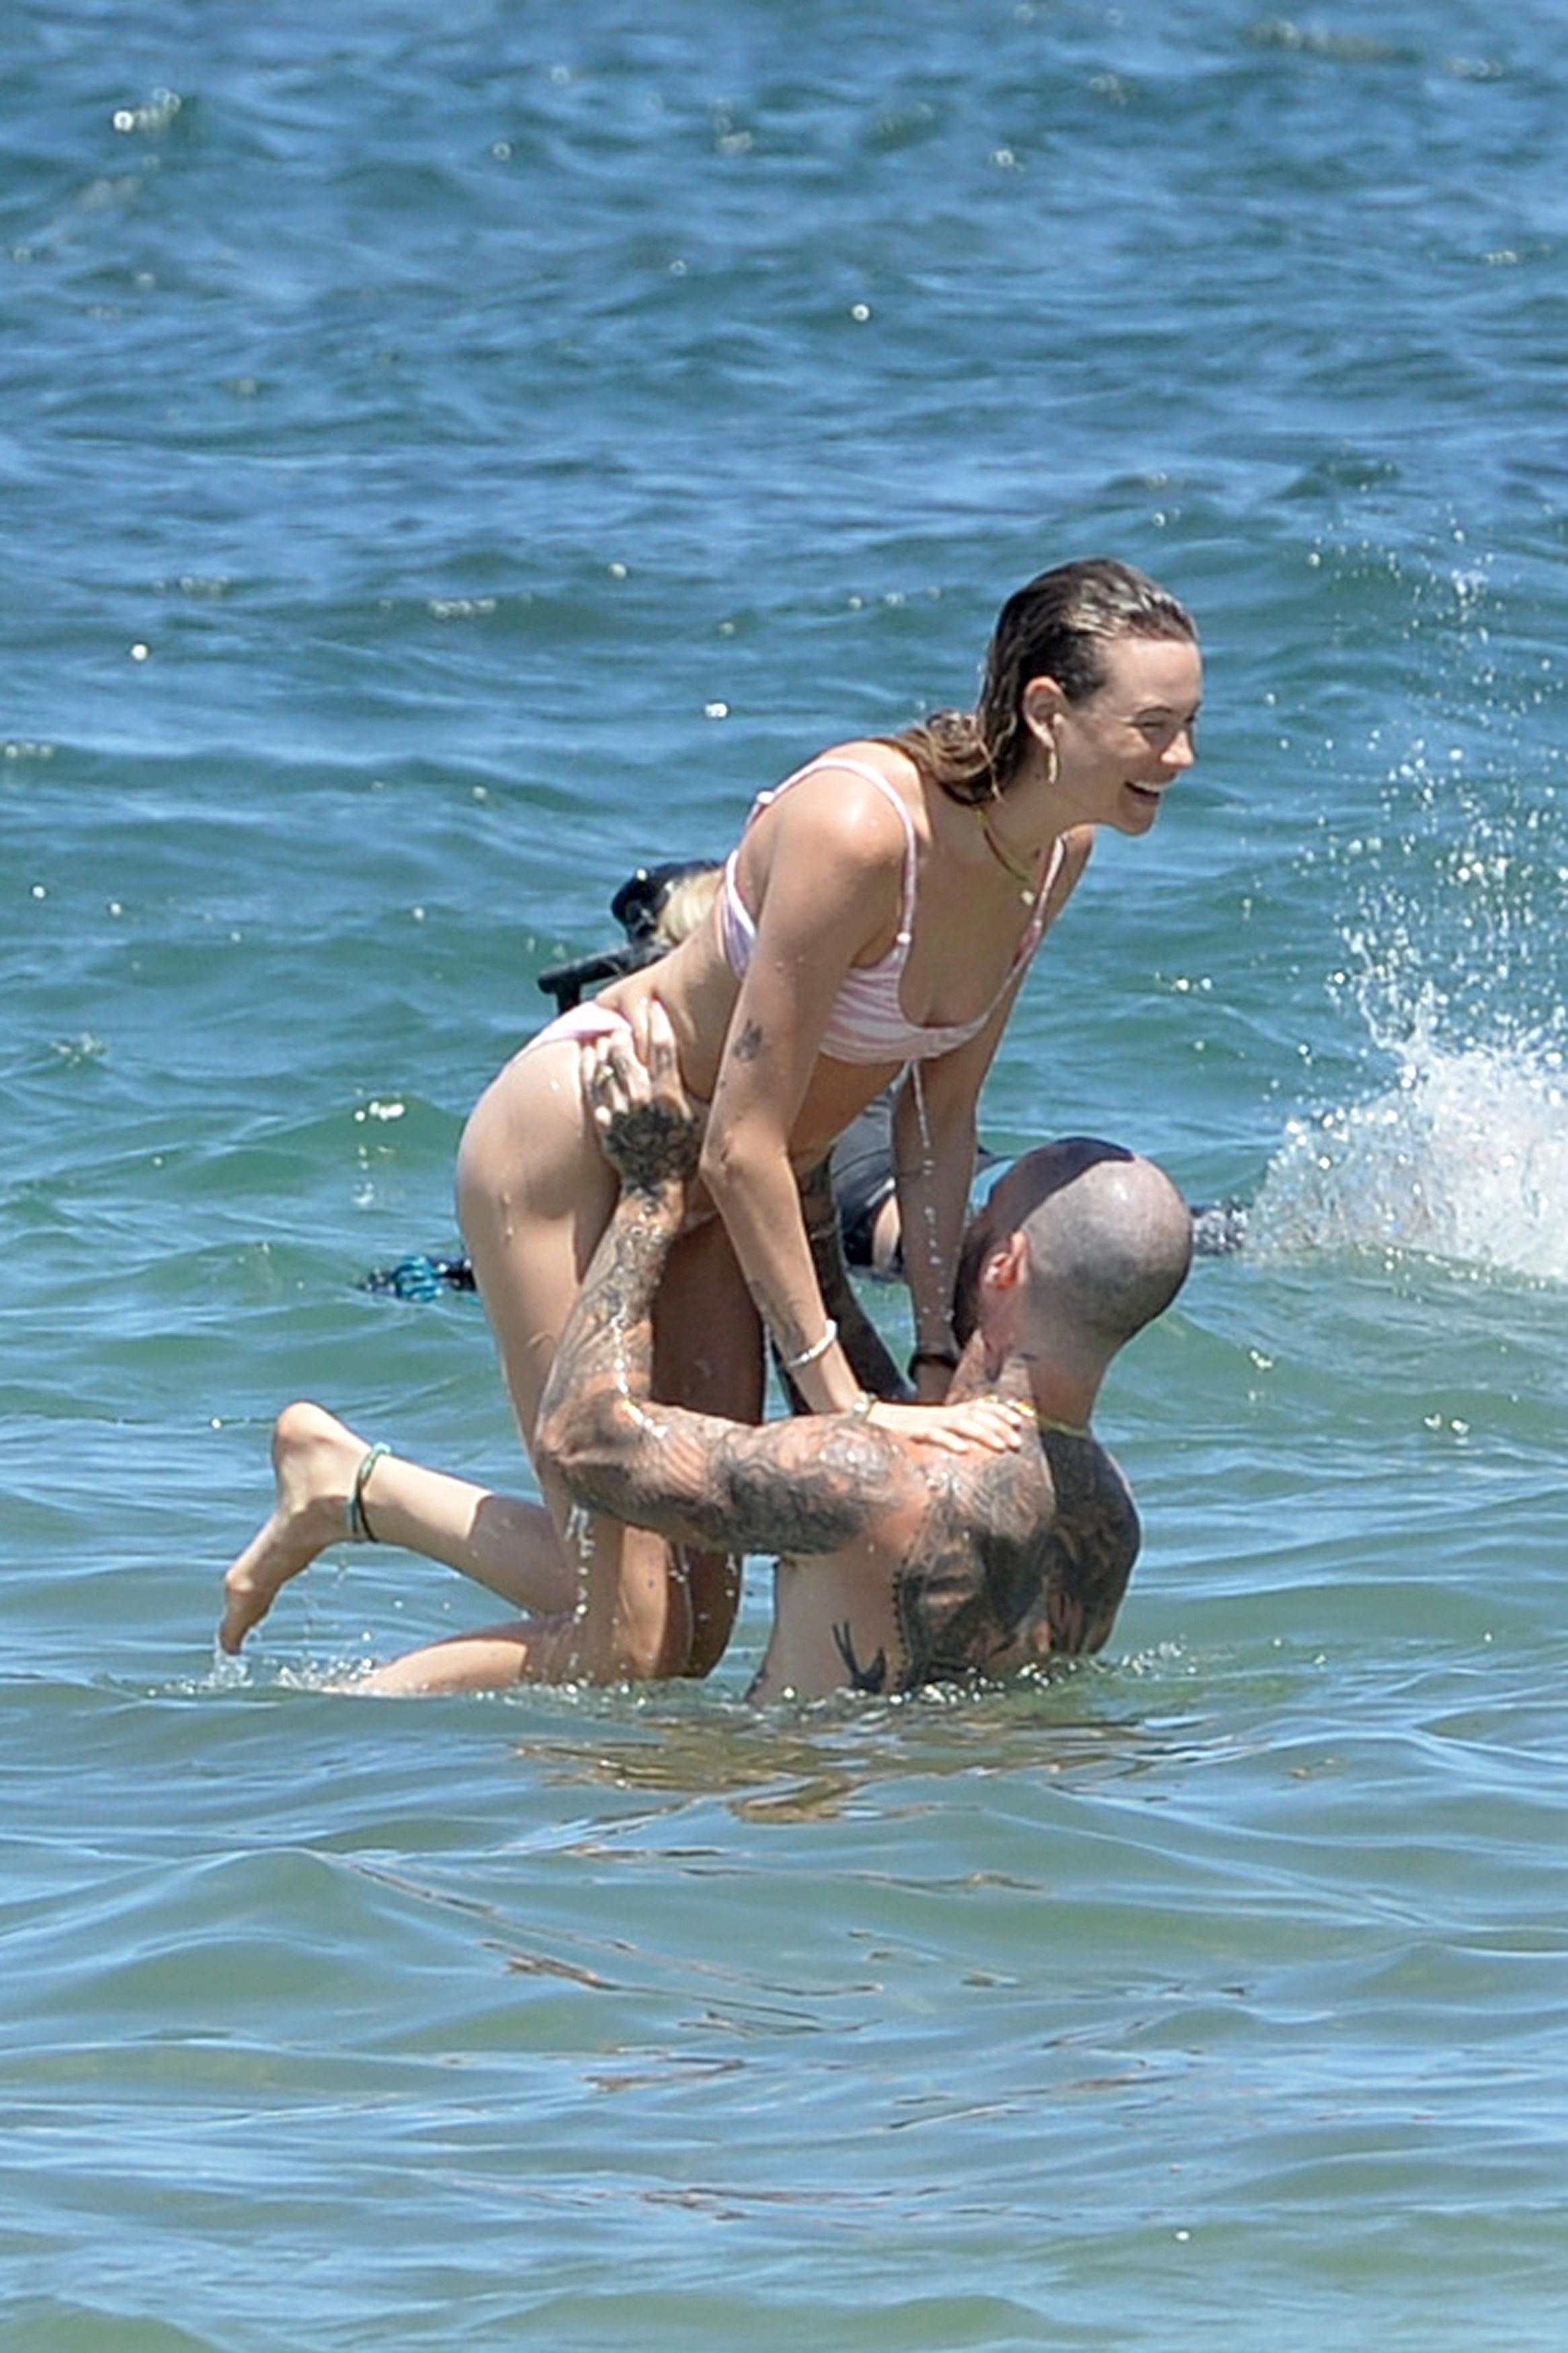 Photo © 2021 Backgrid/The Grosby Group6 JUNE 2021 *EXCLUSIVE* Maui, HI  - Adam Levine and Behati Prinsloo hit the beach in Maui with friends and family. The couple was having a great time playing in the water with their children and displaying some PD (Foto: Backgrid/The Grosby Group)